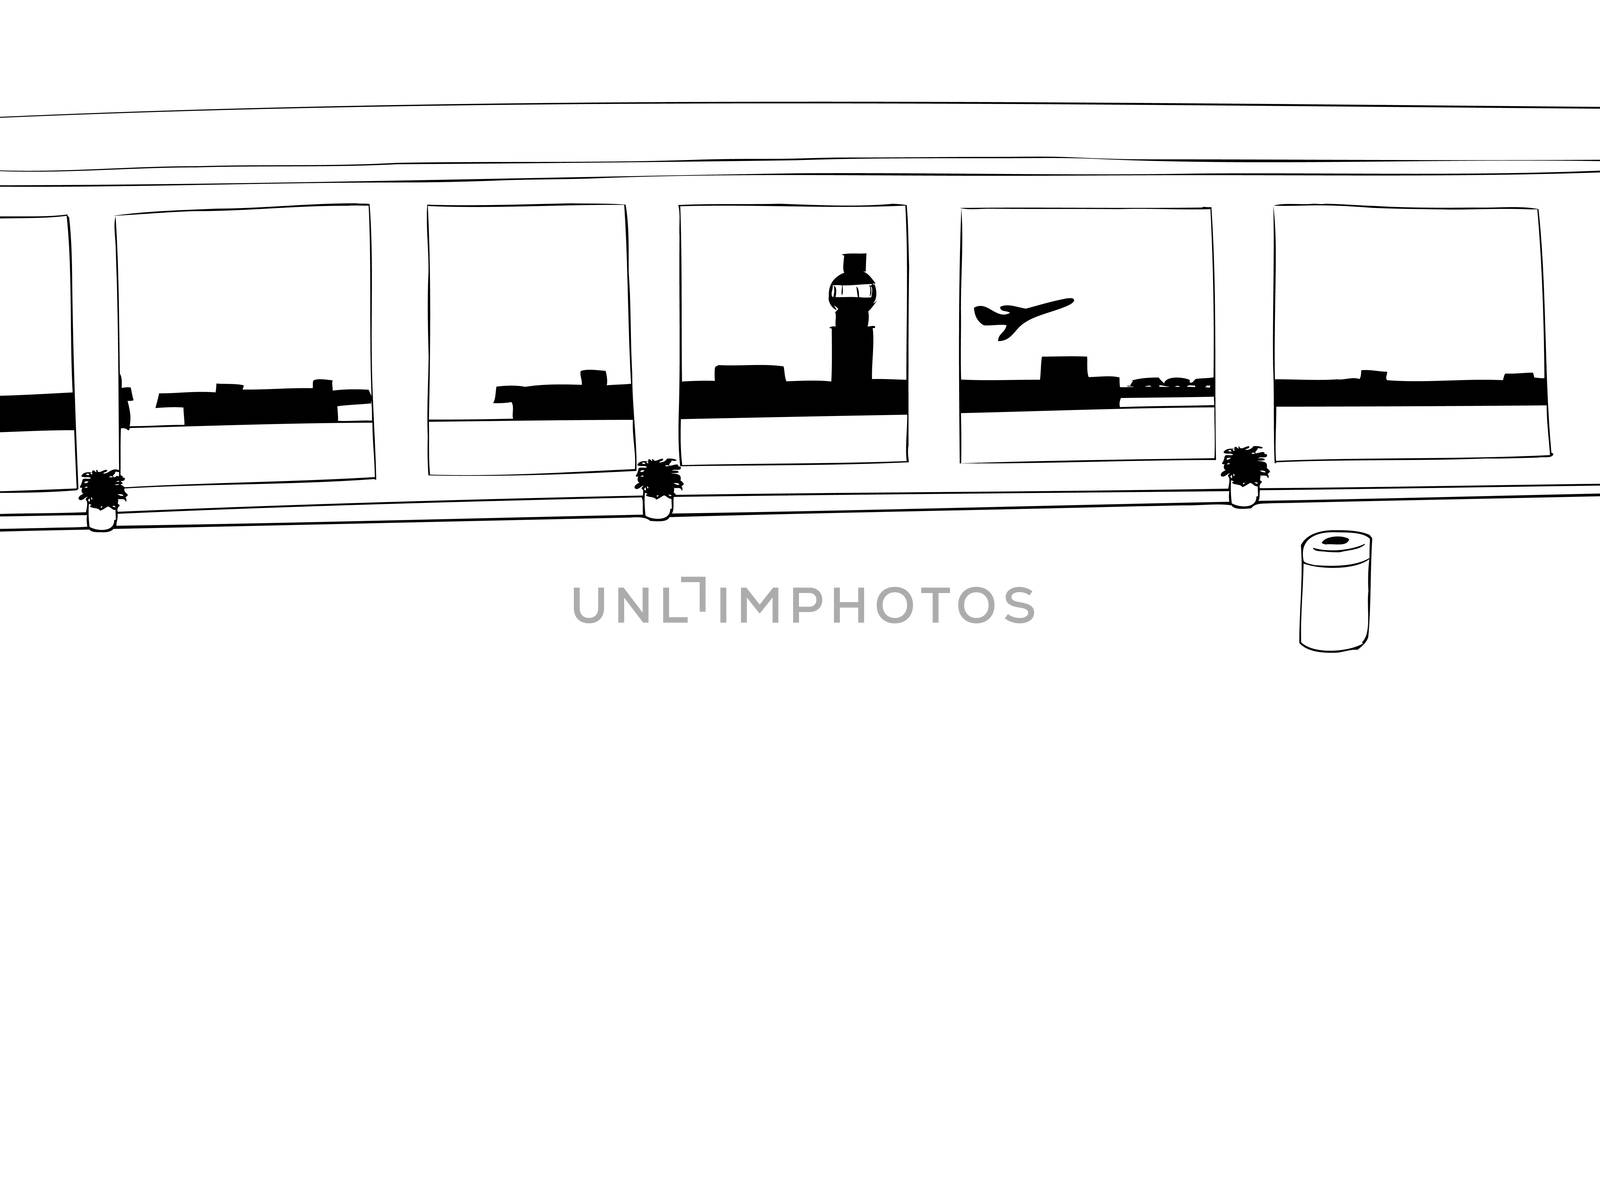 Outlined Airport Interior by TheBlackRhino